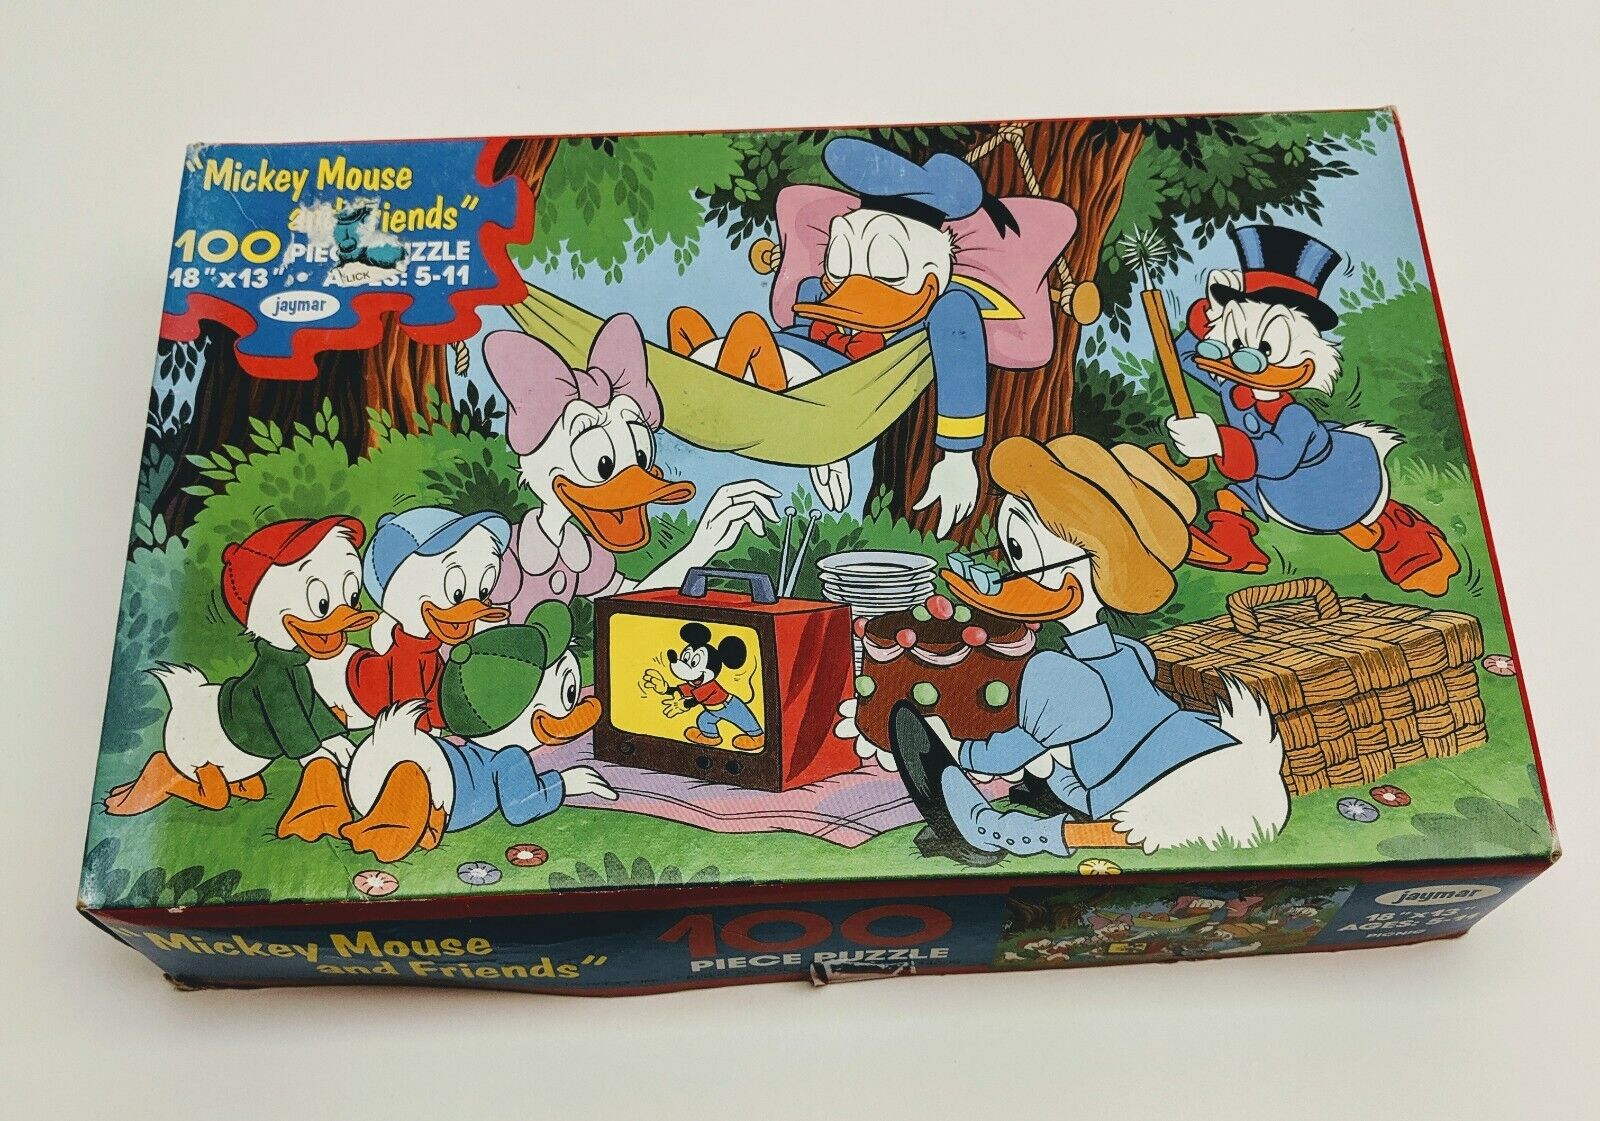 Vintage 1980s Disney Mickey Mouse and Friends 100 piece jigsaw puzzle by Jaymar